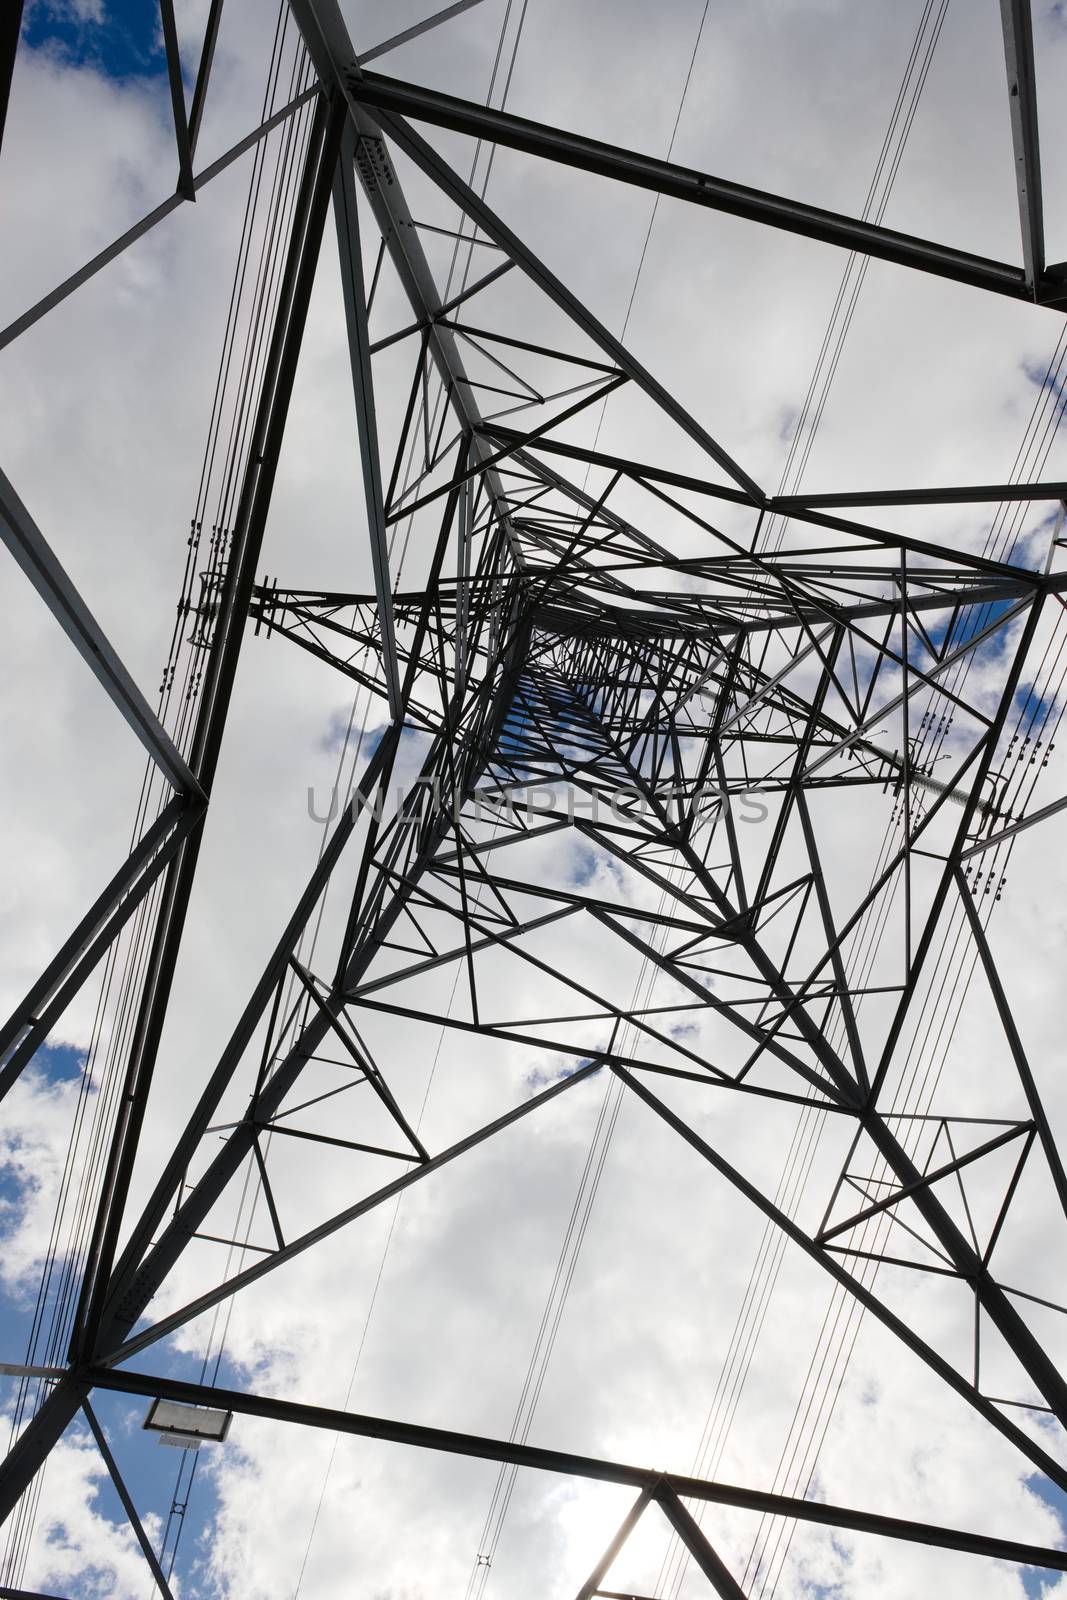 Writing and telephone number removed from this plain image of an electrical pylon. This post is industrial distribution infrastructure for the grid